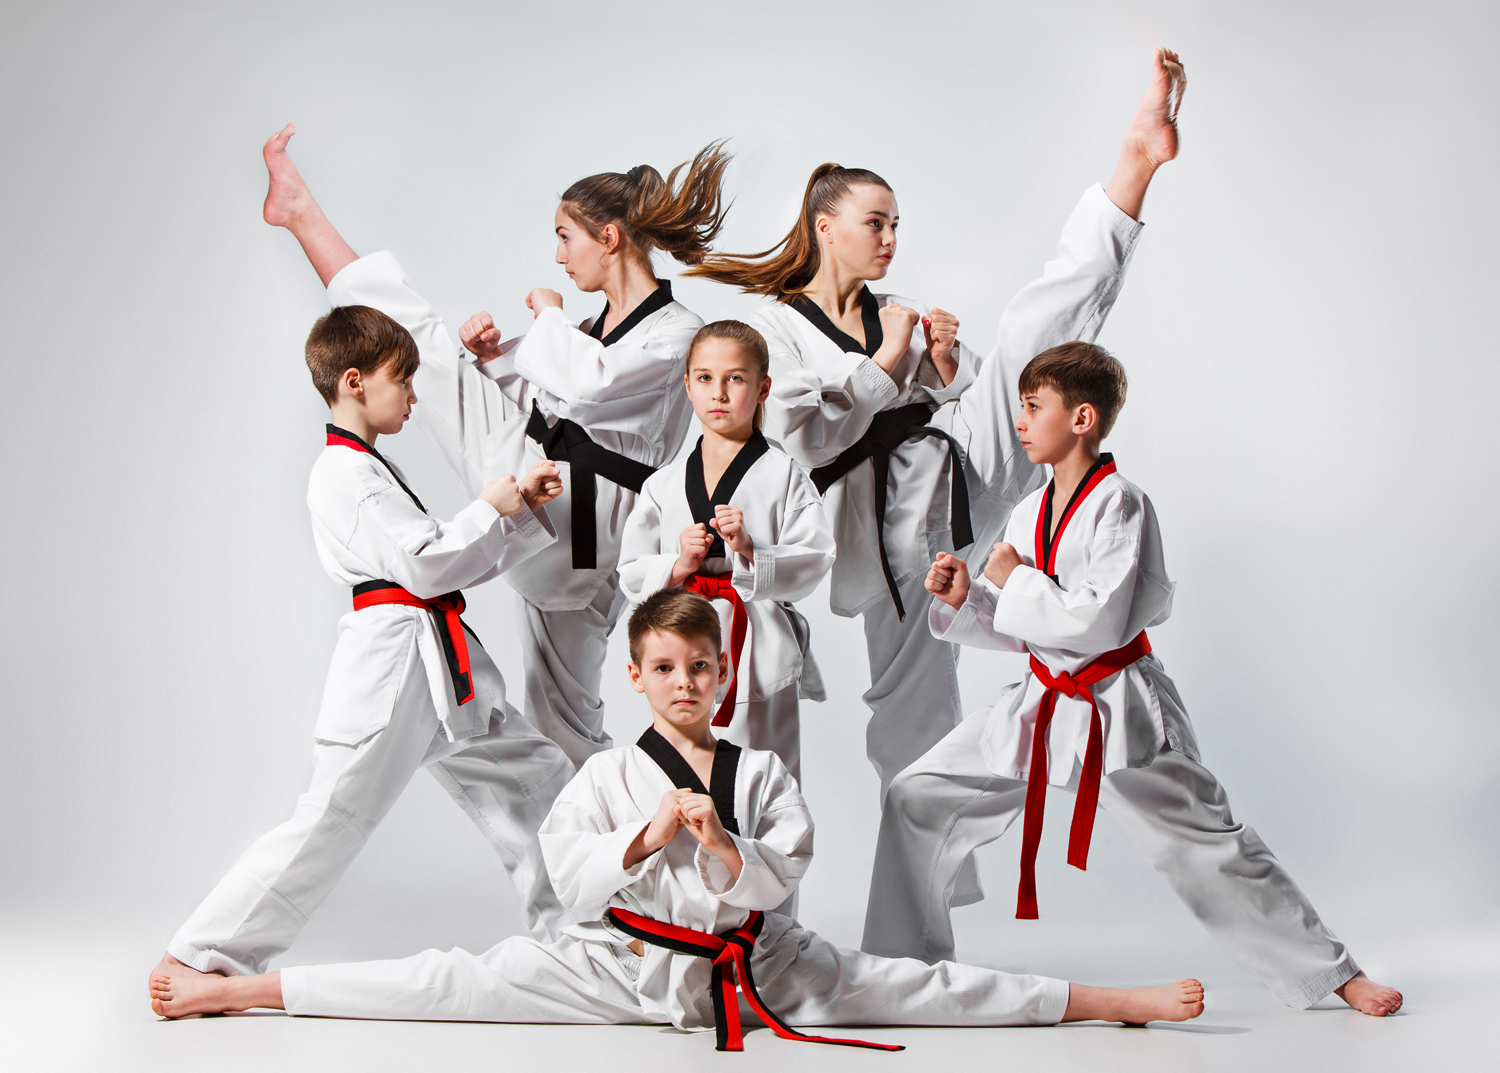 A Laborious Punch In Karate And Metal Finger Martial Arts Workouts